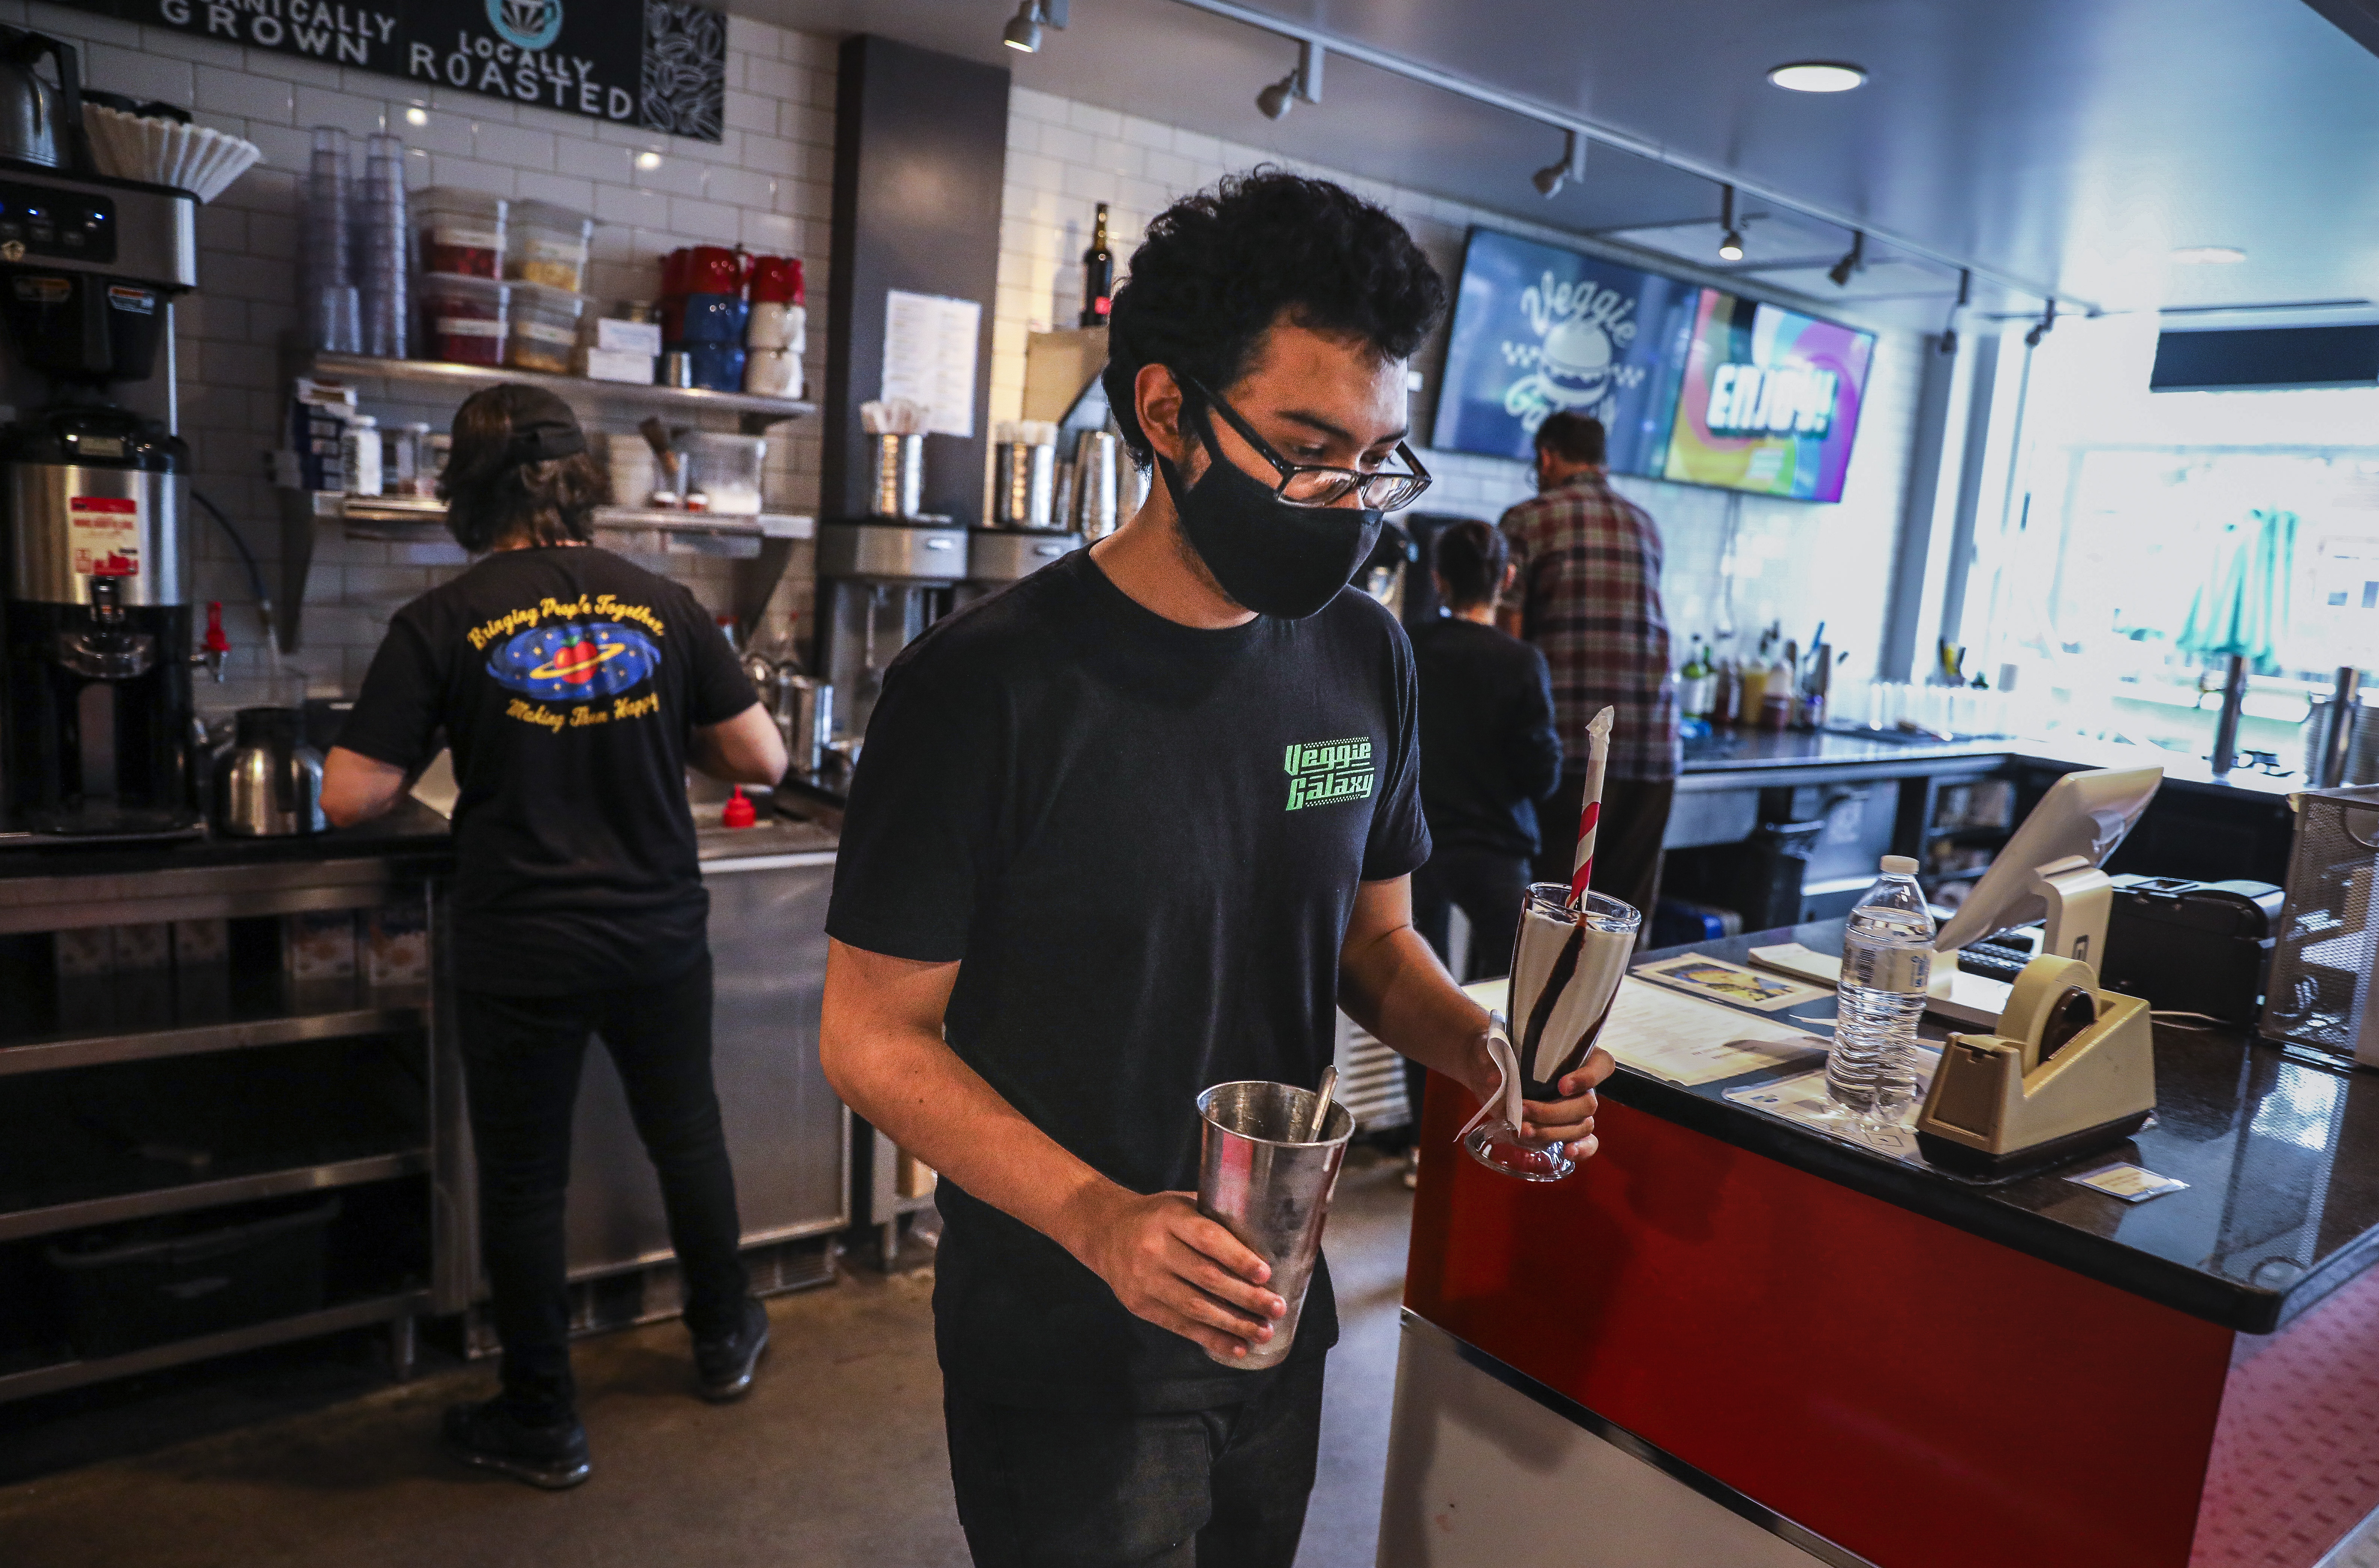 Alex Aviles delivered milkshakes during the Friday afternoon rush at Veggie Galaxy.